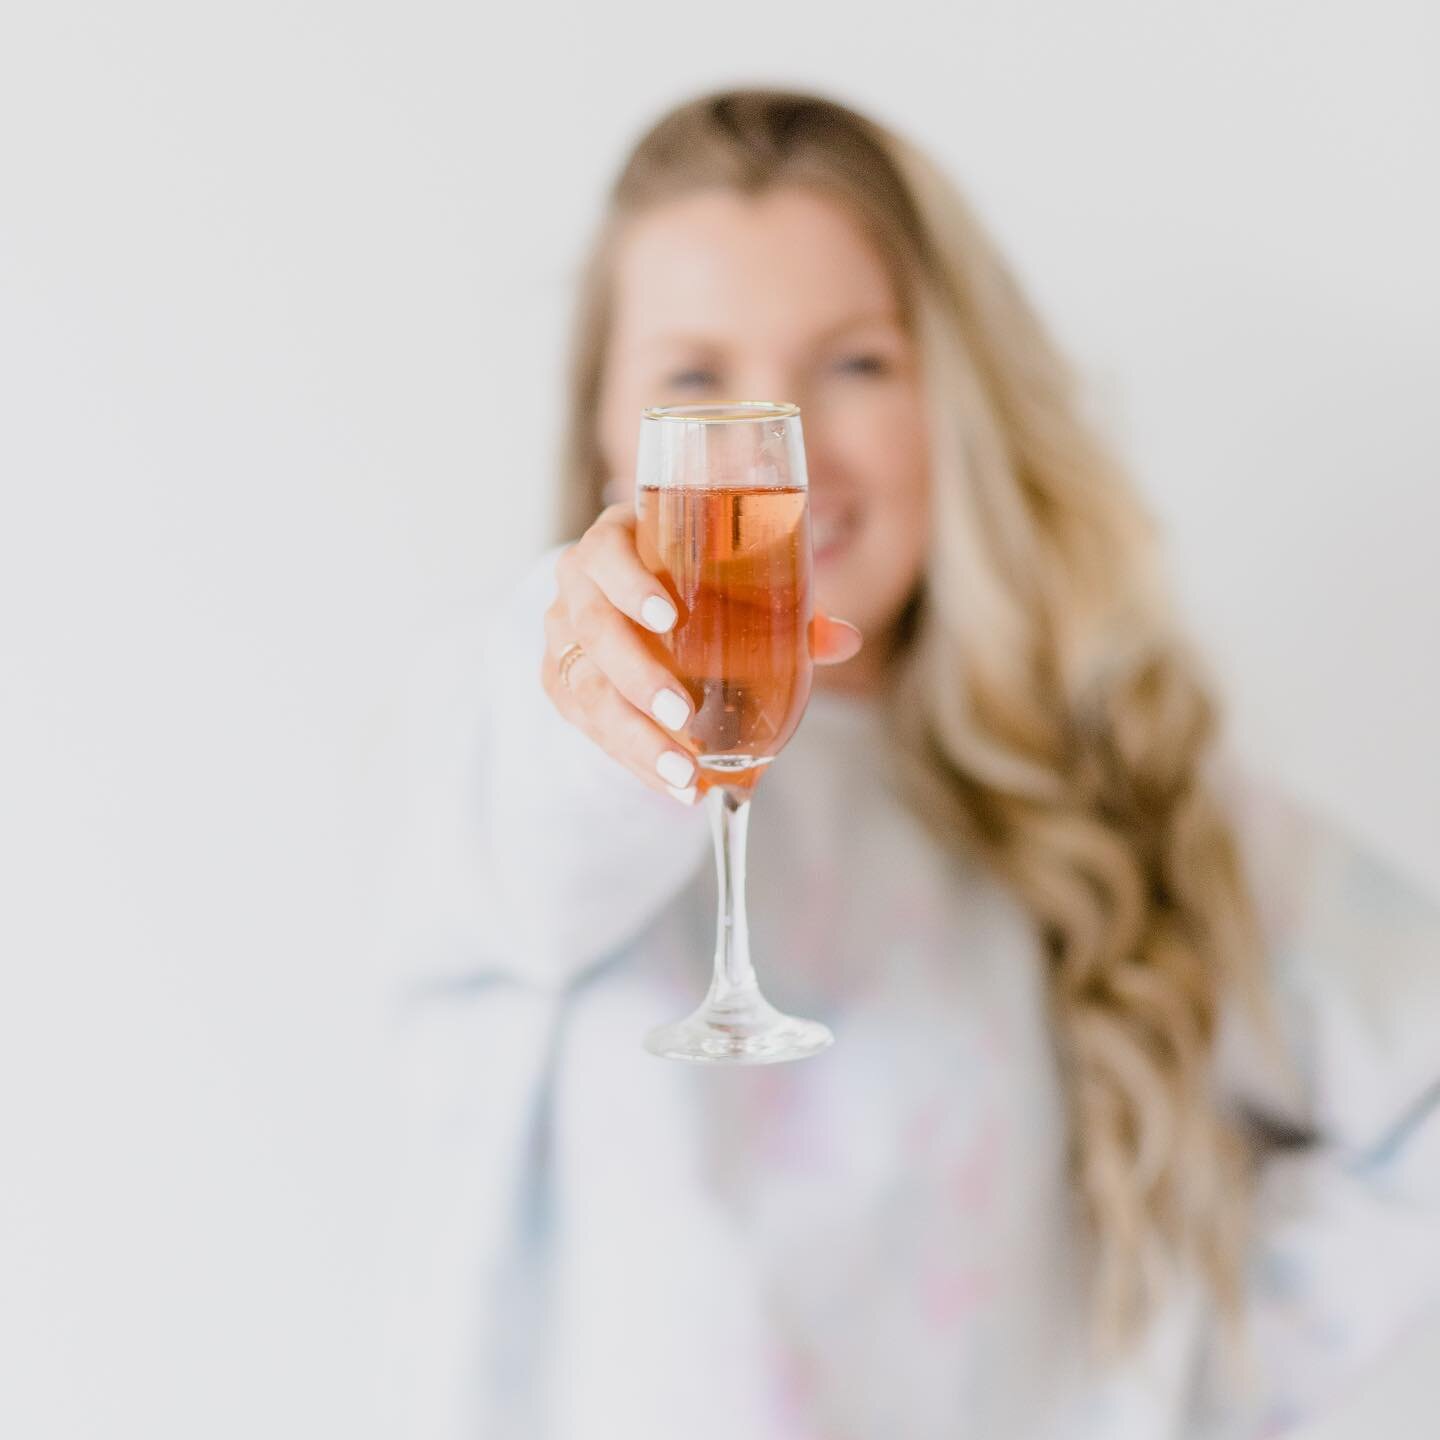 𝗜 𝗺𝗮𝗱𝗲 𝗮 𝘄𝗲𝗯𝘀𝗶𝘁𝗲!! 🥂🍾⁣
⁣
Just kidding - @emily.lavinskas made me a website and it is absolutely perfect. I&rsquo;d love for you guys to check it out and let us know what you think!!! Maybe while you&rsquo;re there, you can place an ord